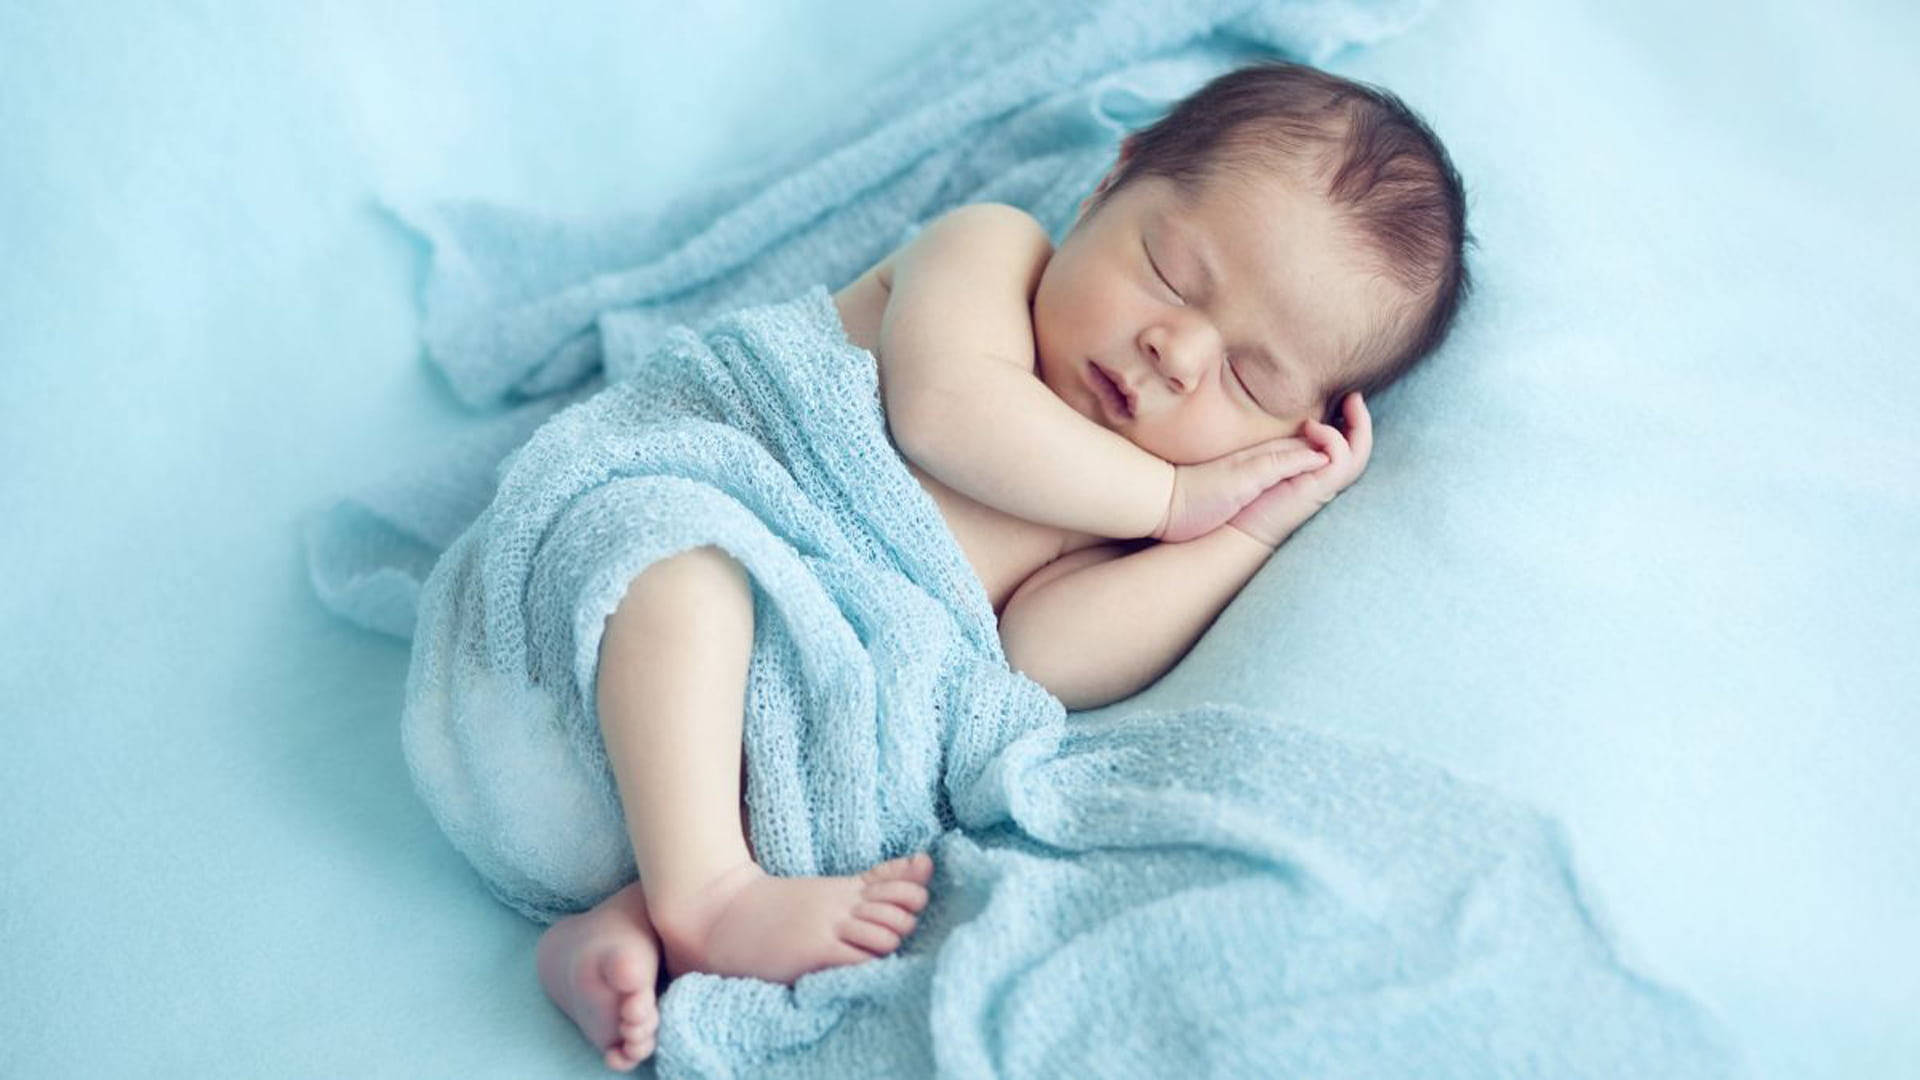 Very Cute Baby With Blue Blanket